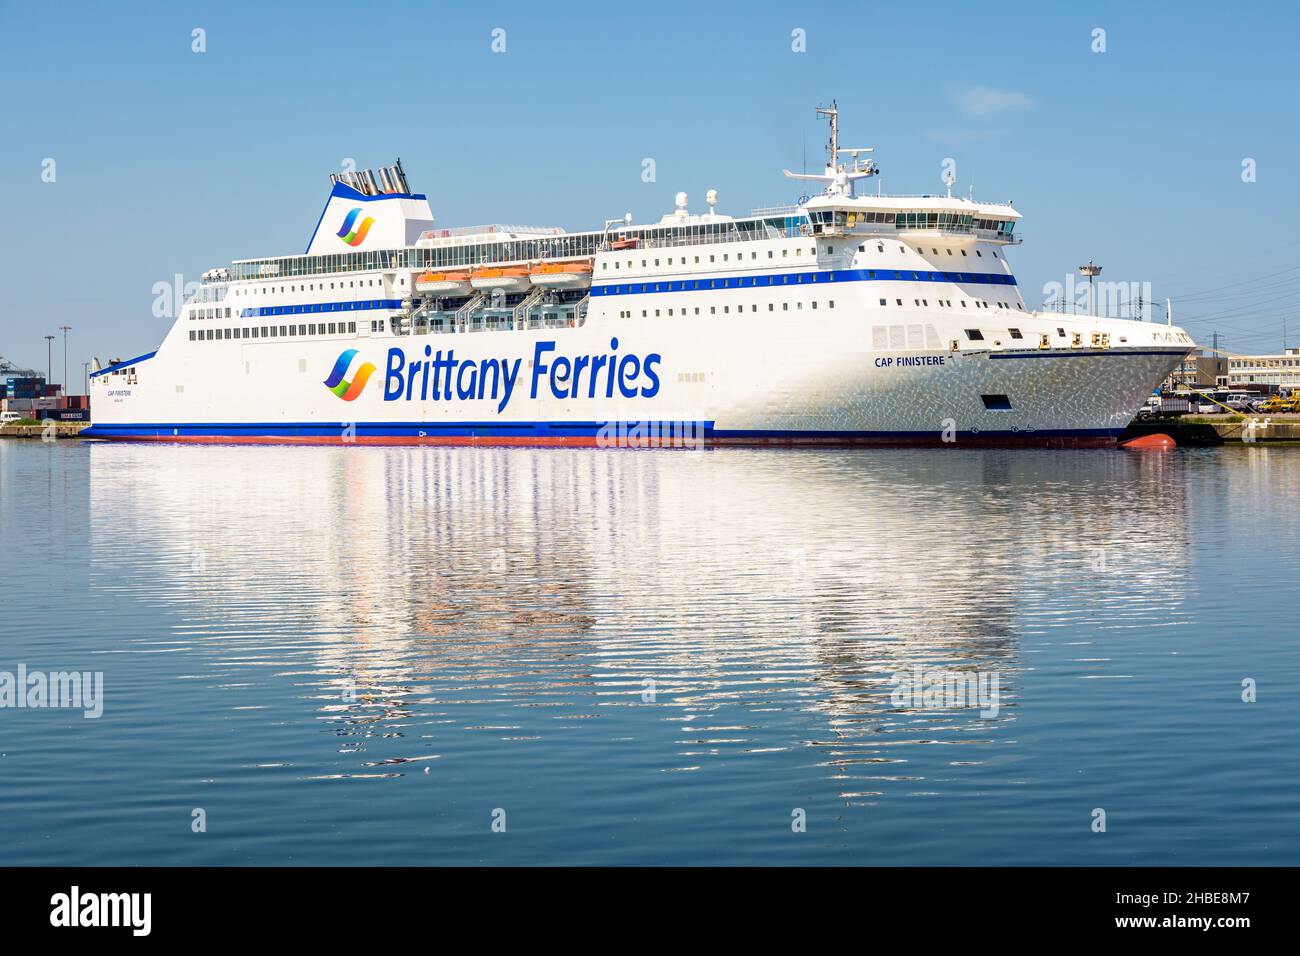 The ferry boat "Cap Finistere" from the Brittany Ferries company moored in the port of Le Havre. Stock Photo